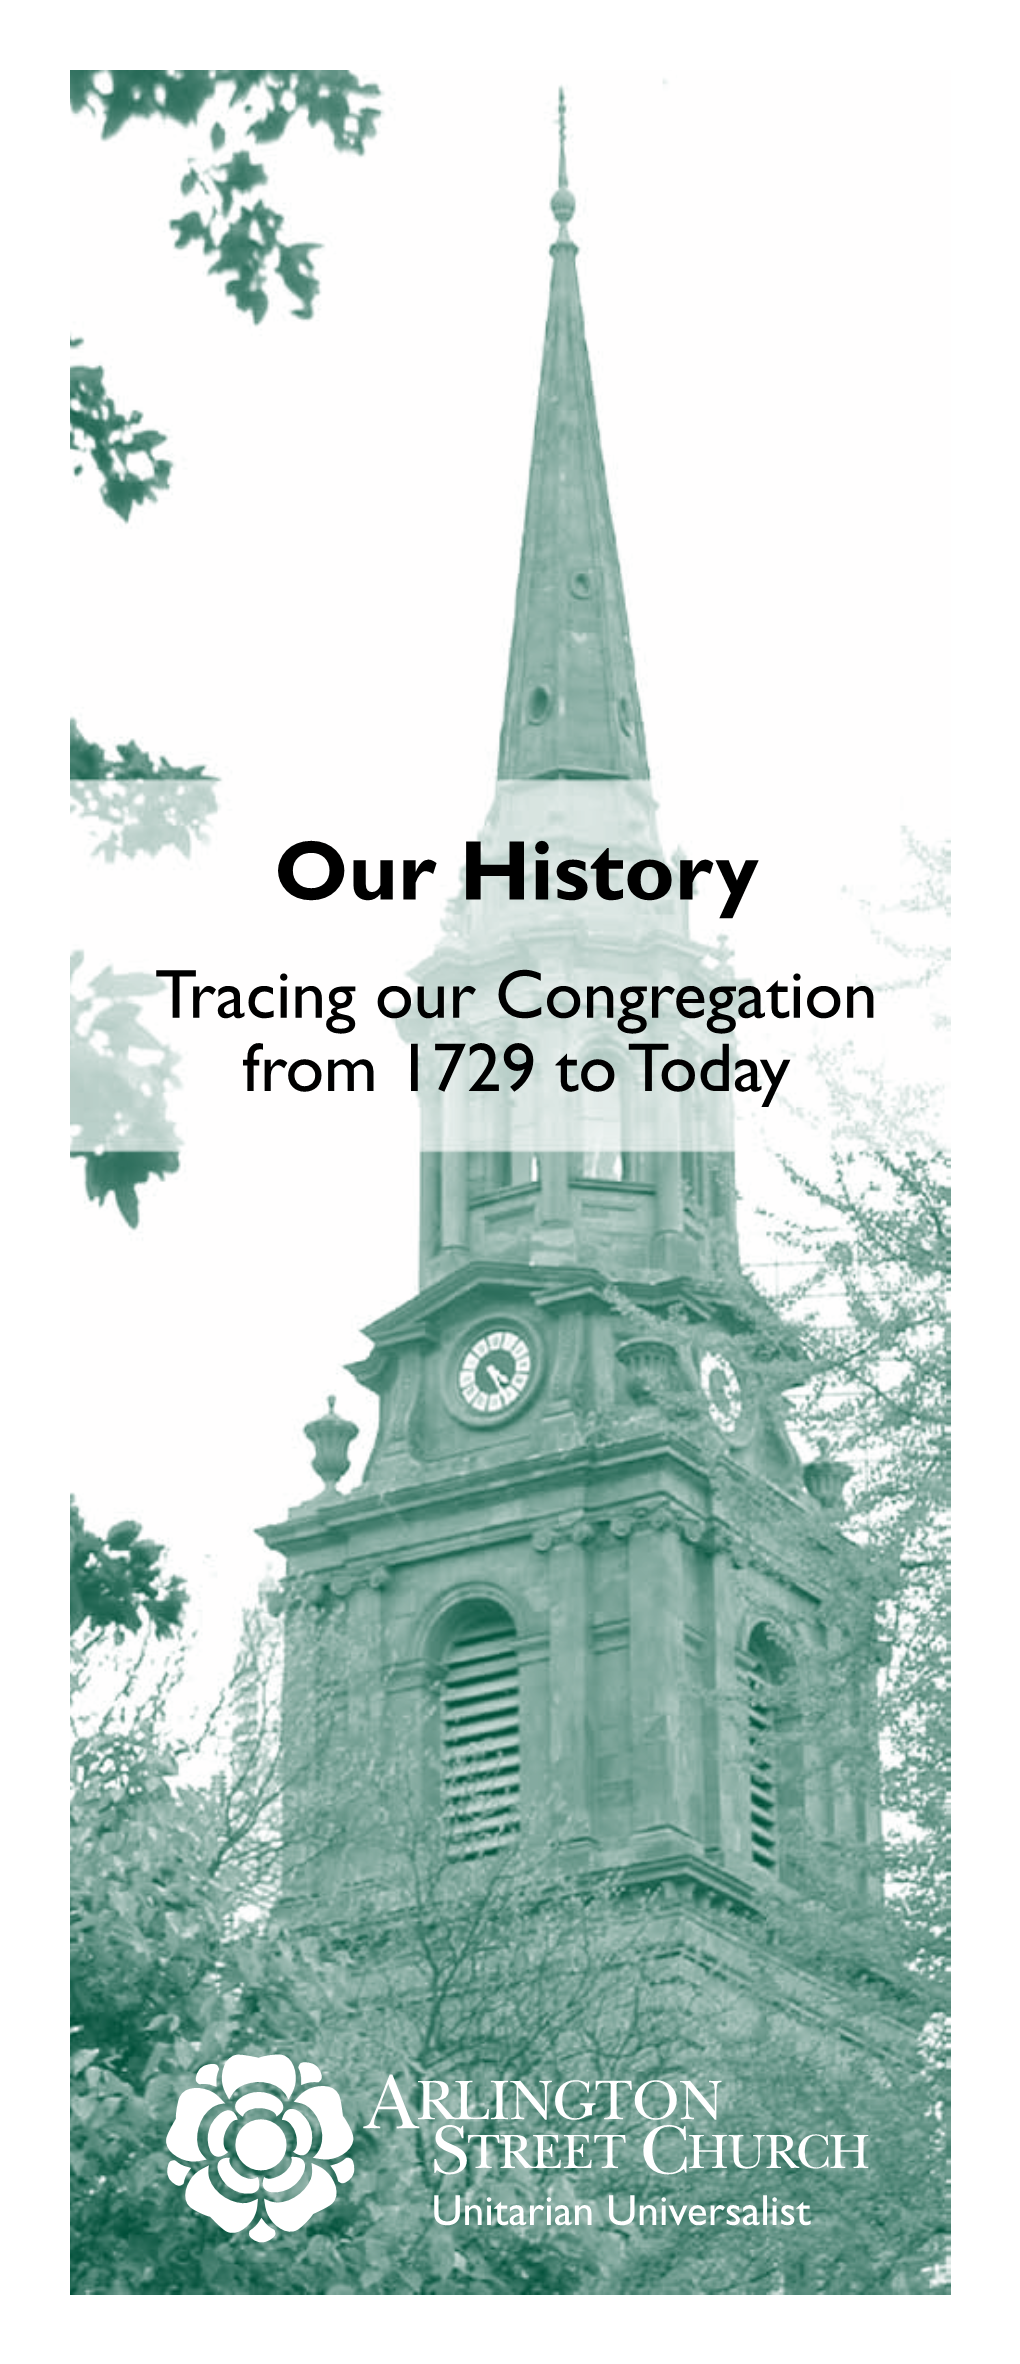 Our History Tracing Our Congregation from 1729 to Today